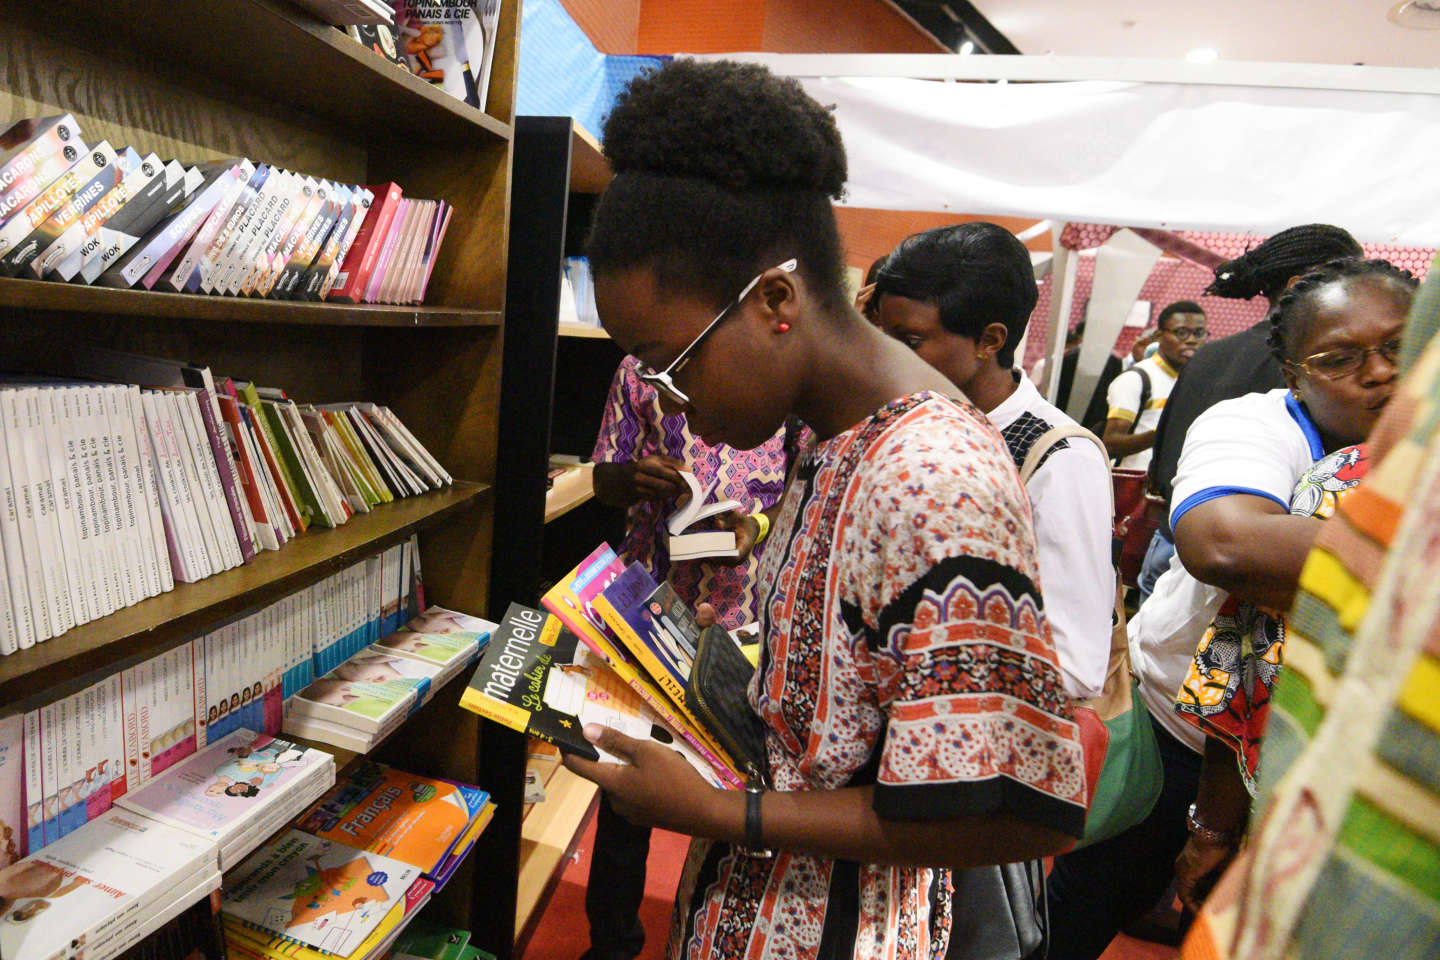 In Côte d’Ivoire, publishing houses are multiplying, for better and for worse